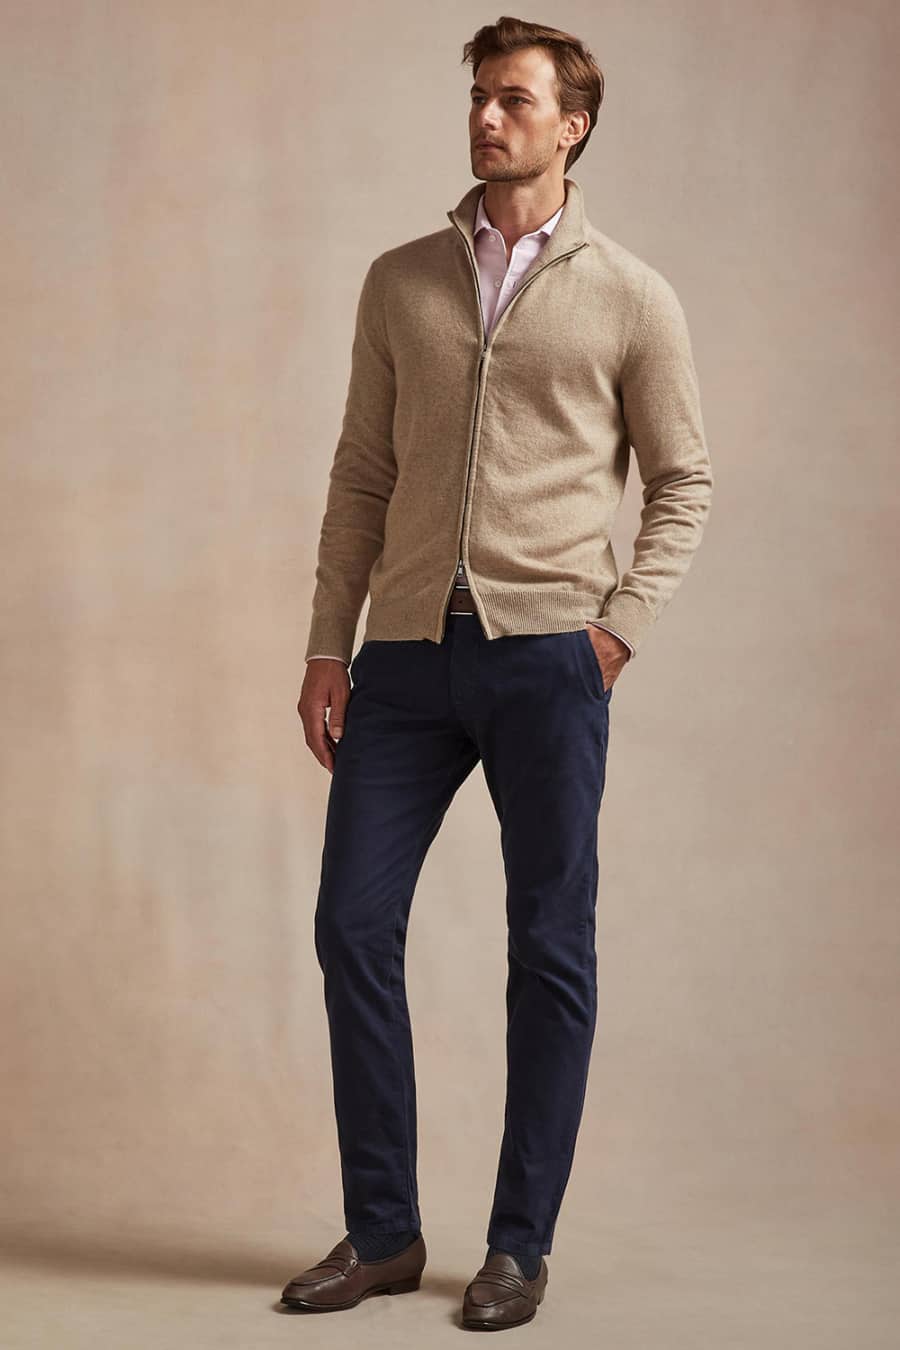 Men's navy chinos, pink shirt and zip through cardigan outfit